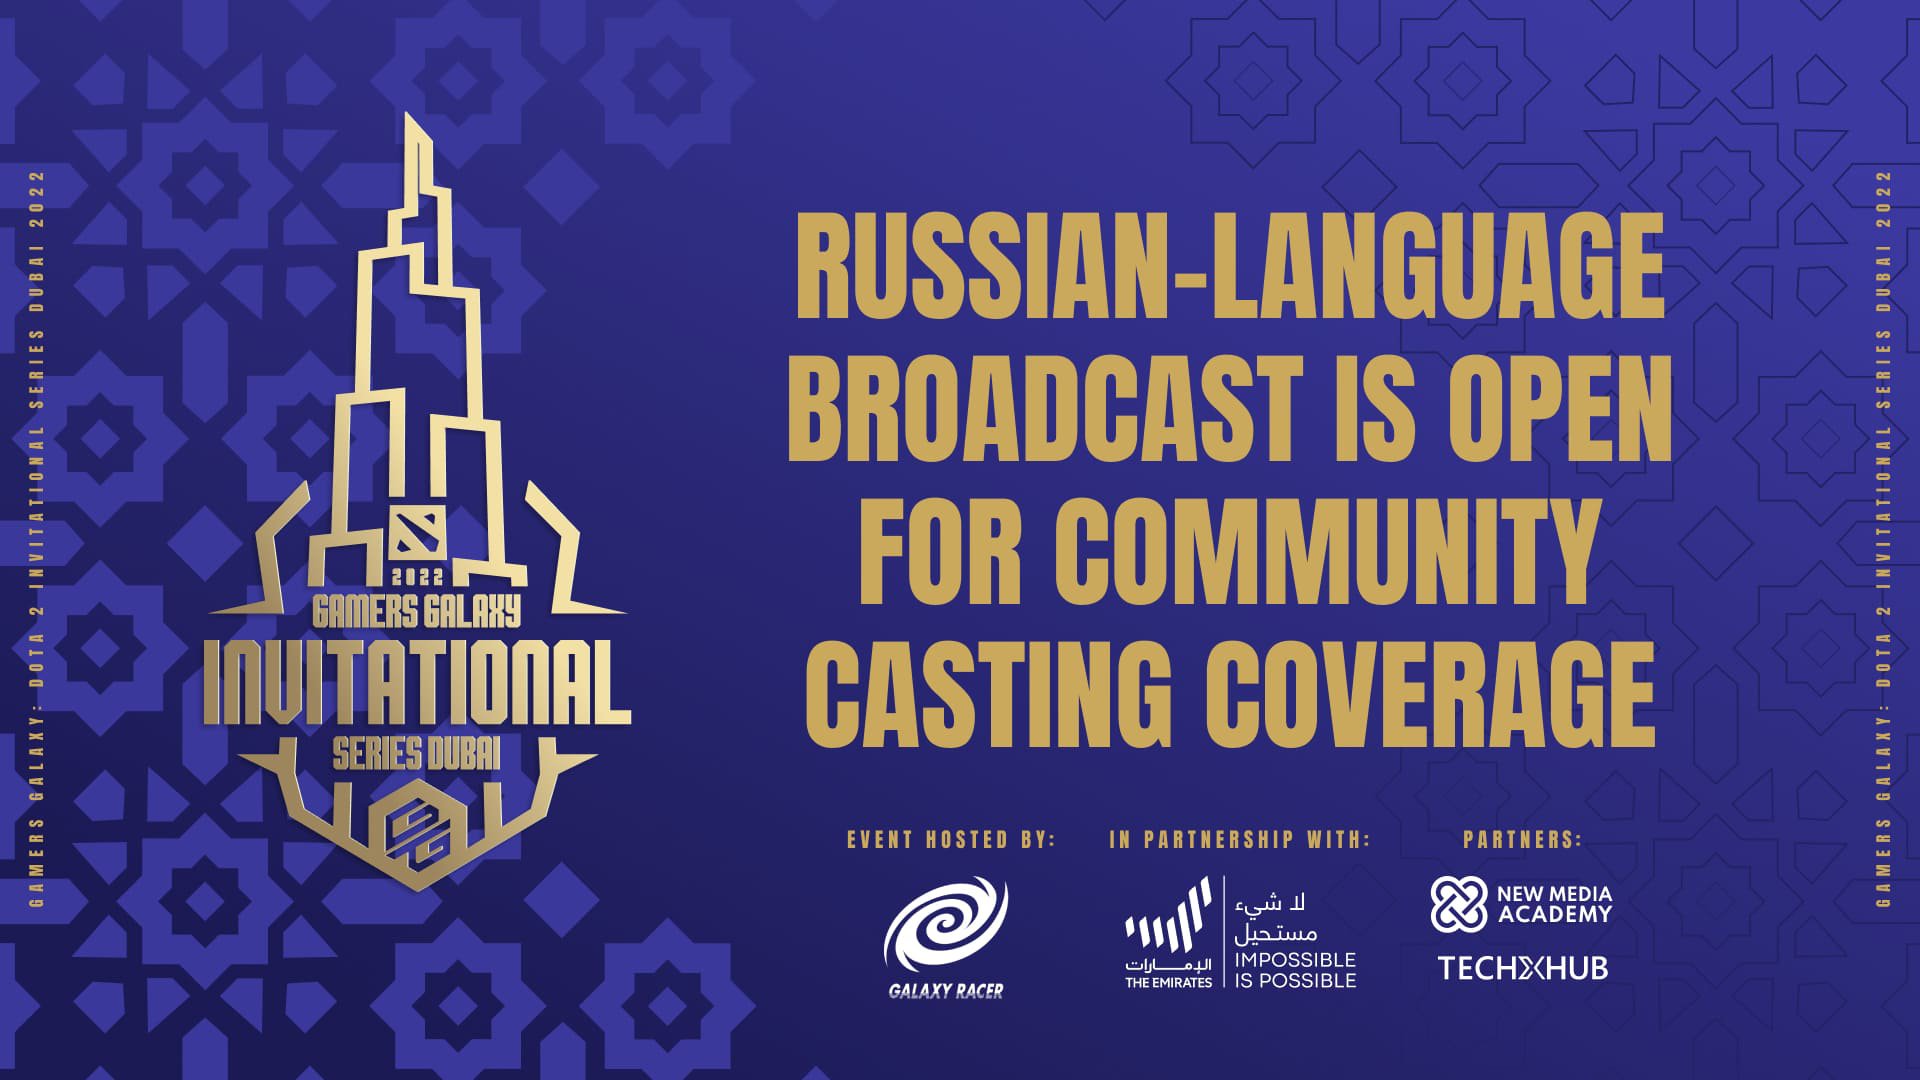 WePlay Esports makes the Russian-language broadcast of GAMERS GALAXY: Dota 2 Invitational Series Dubai 2022 open for community casting coverage. Visual: WePlay Holding